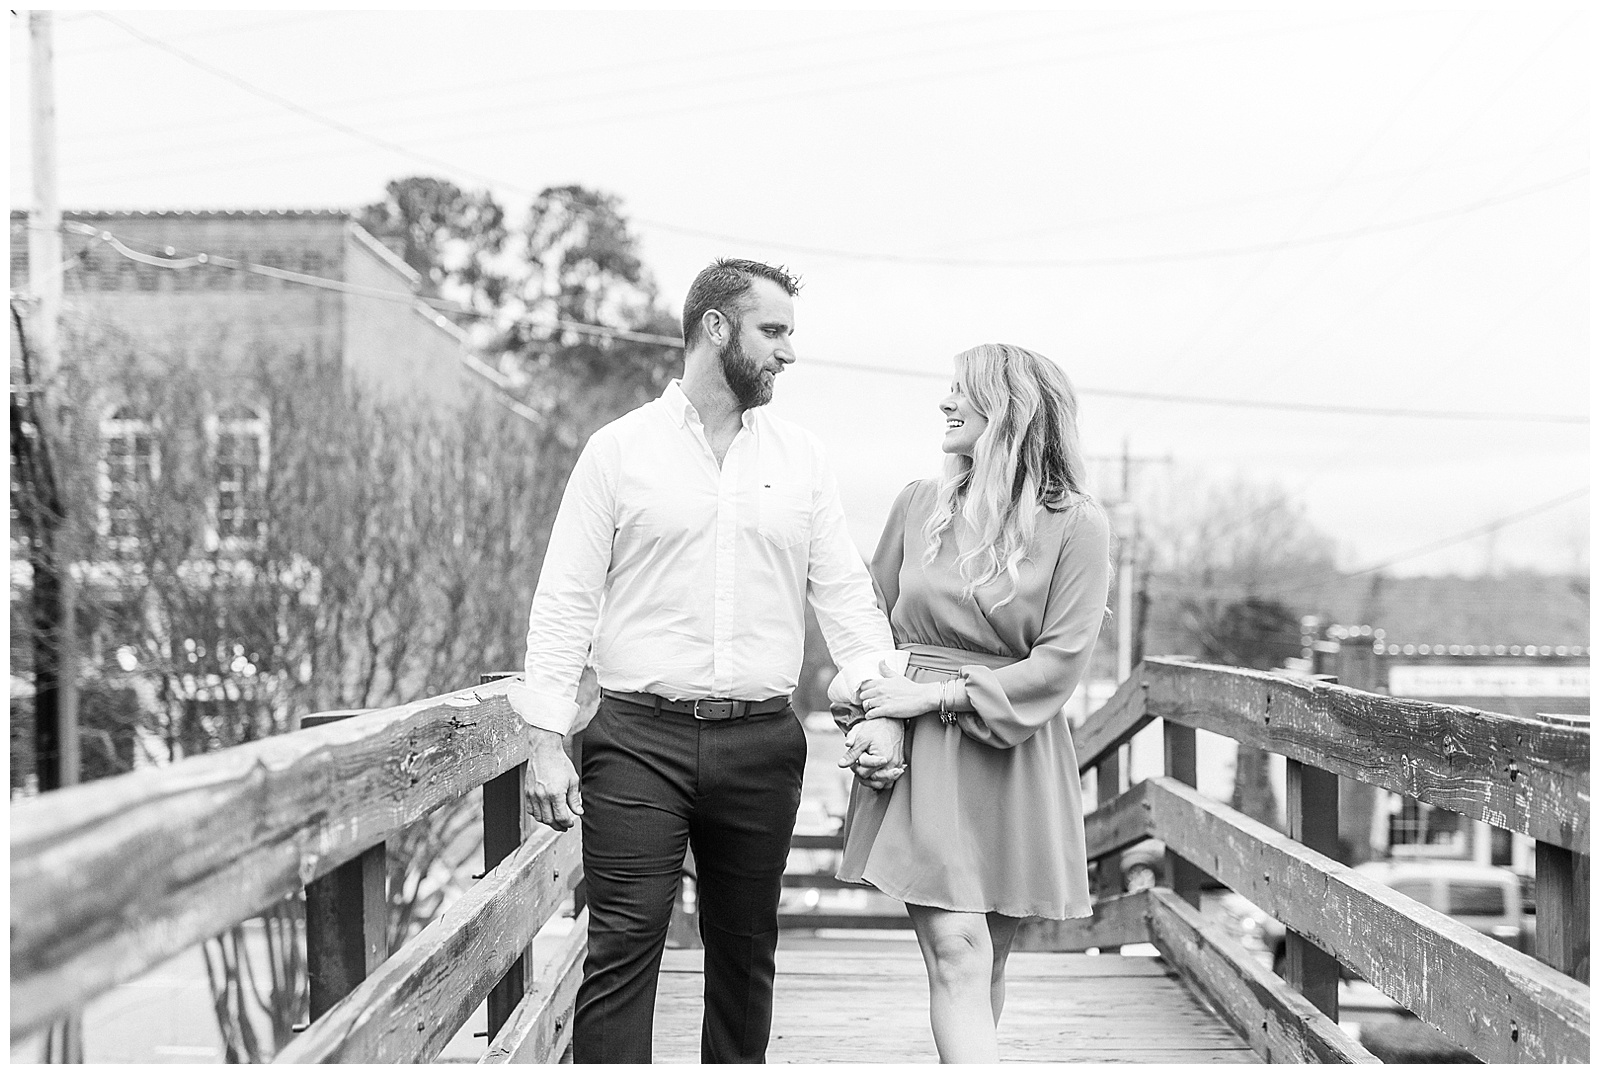 Adorable couple walking across wooden bridge in downtown Waxhaw, NC Engagement Session with Bright Hot Pink Dress Outfit Ideas